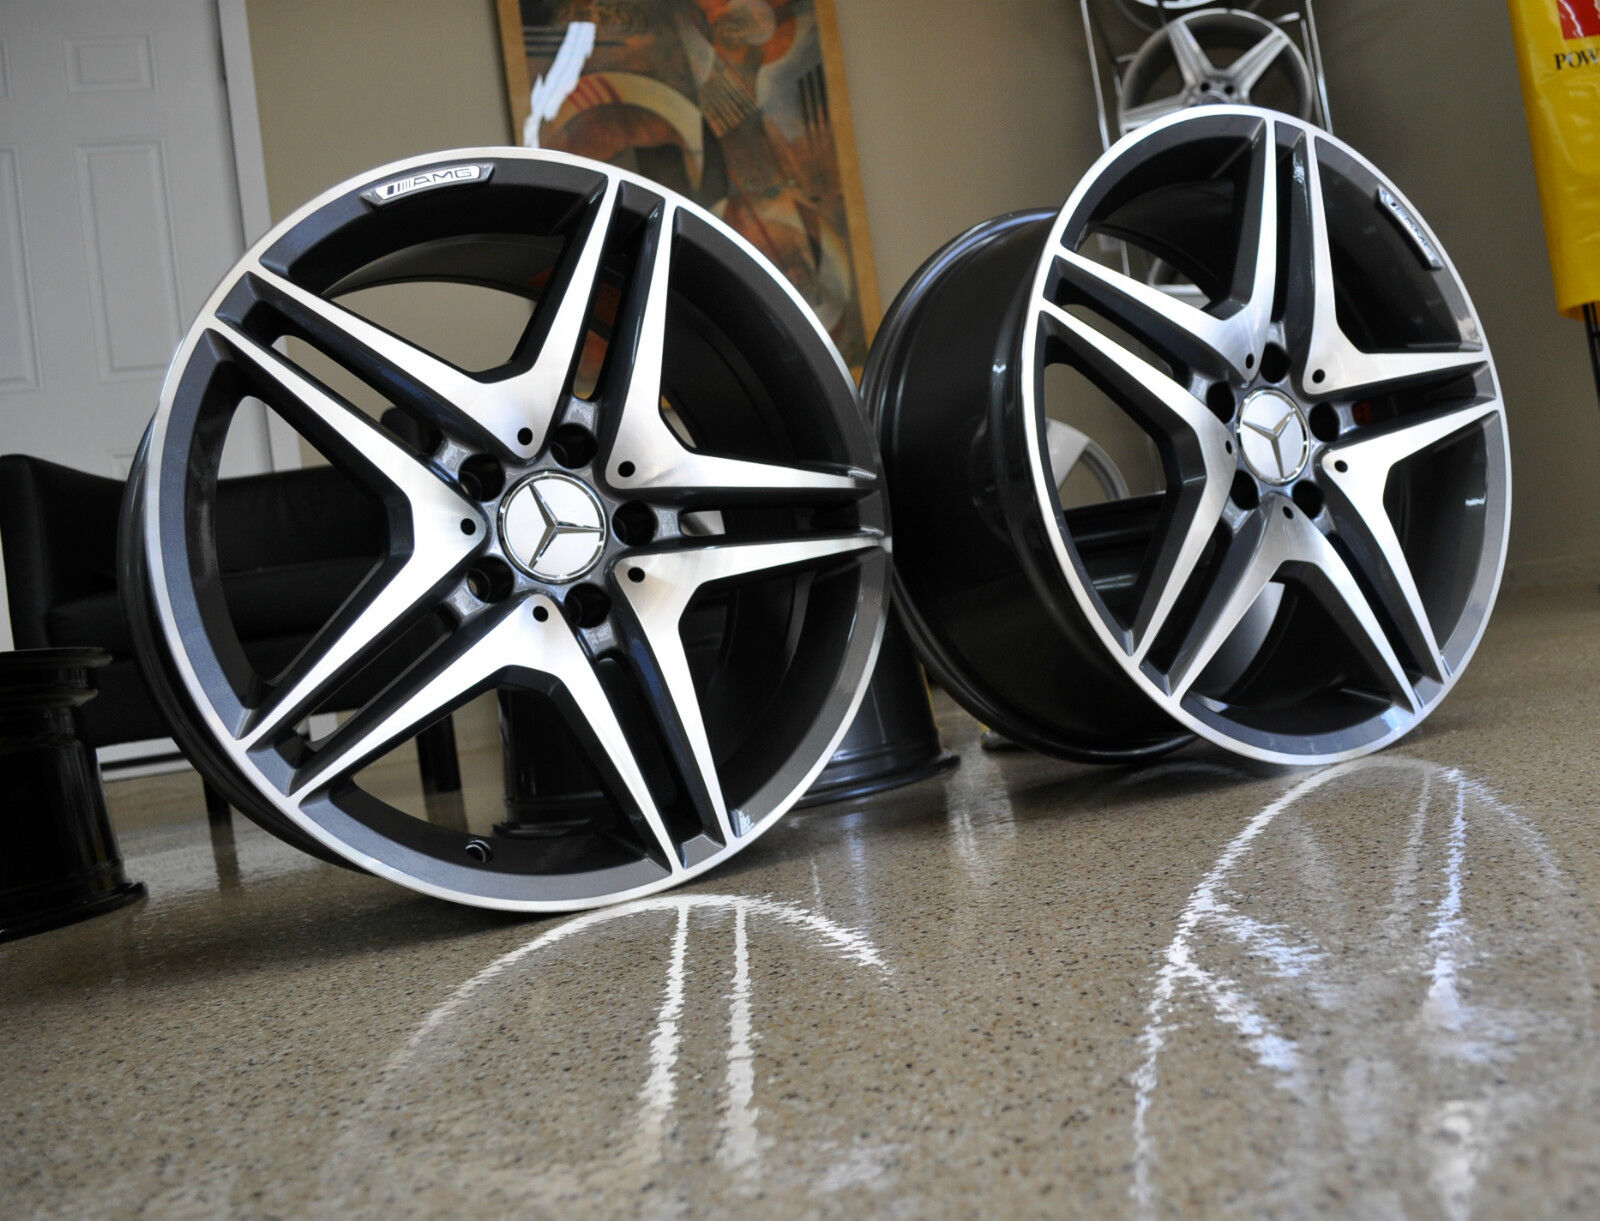 MERCEDES 19 INCH 63 GUNMETAL WHEELS RIMS NEW FITS  S550 CL550 S500 CL500 S55 AMG